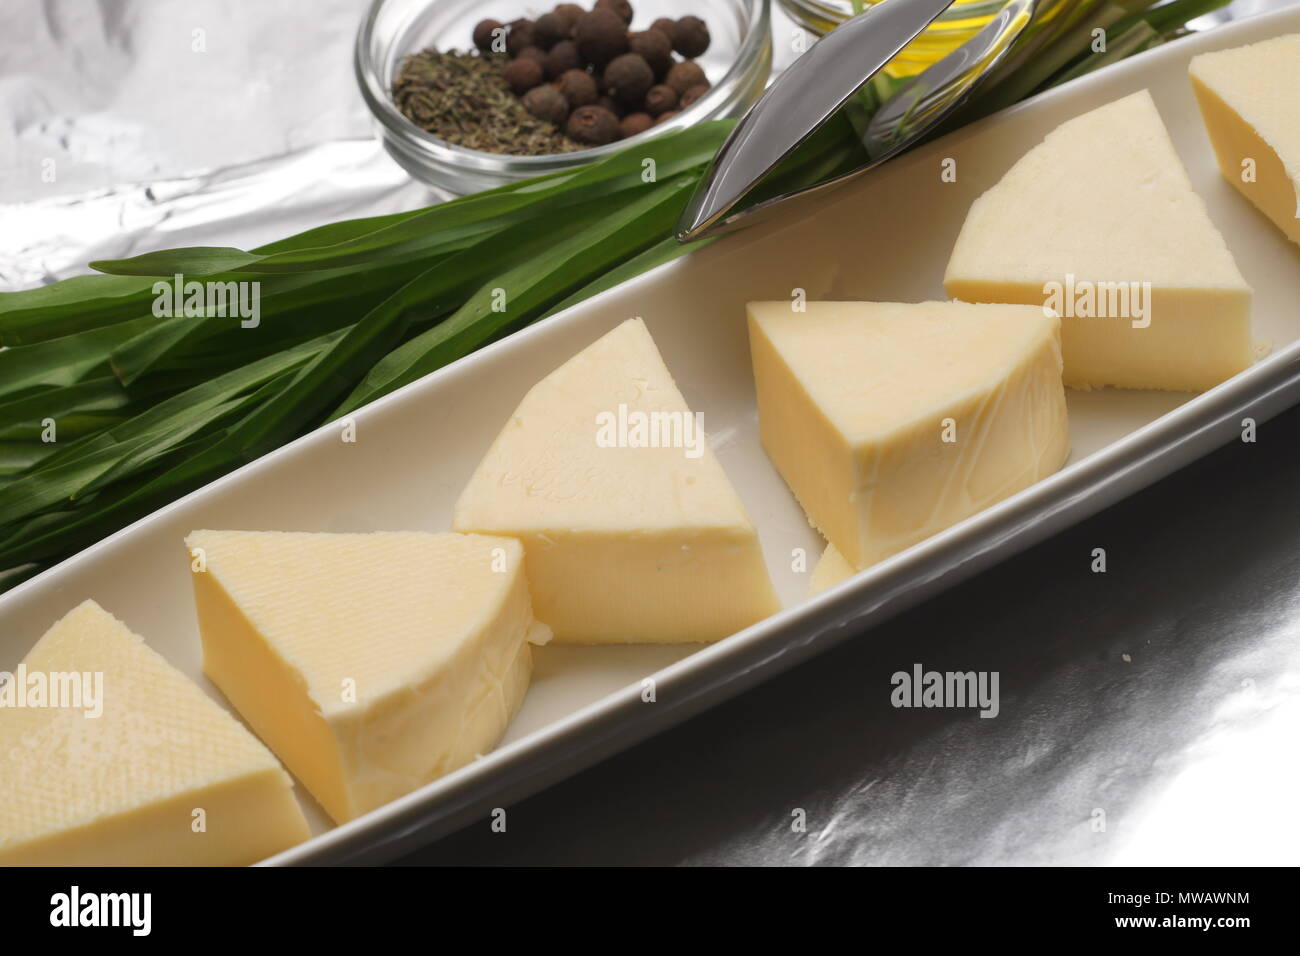 Cheese slices on a plate Stock Photo